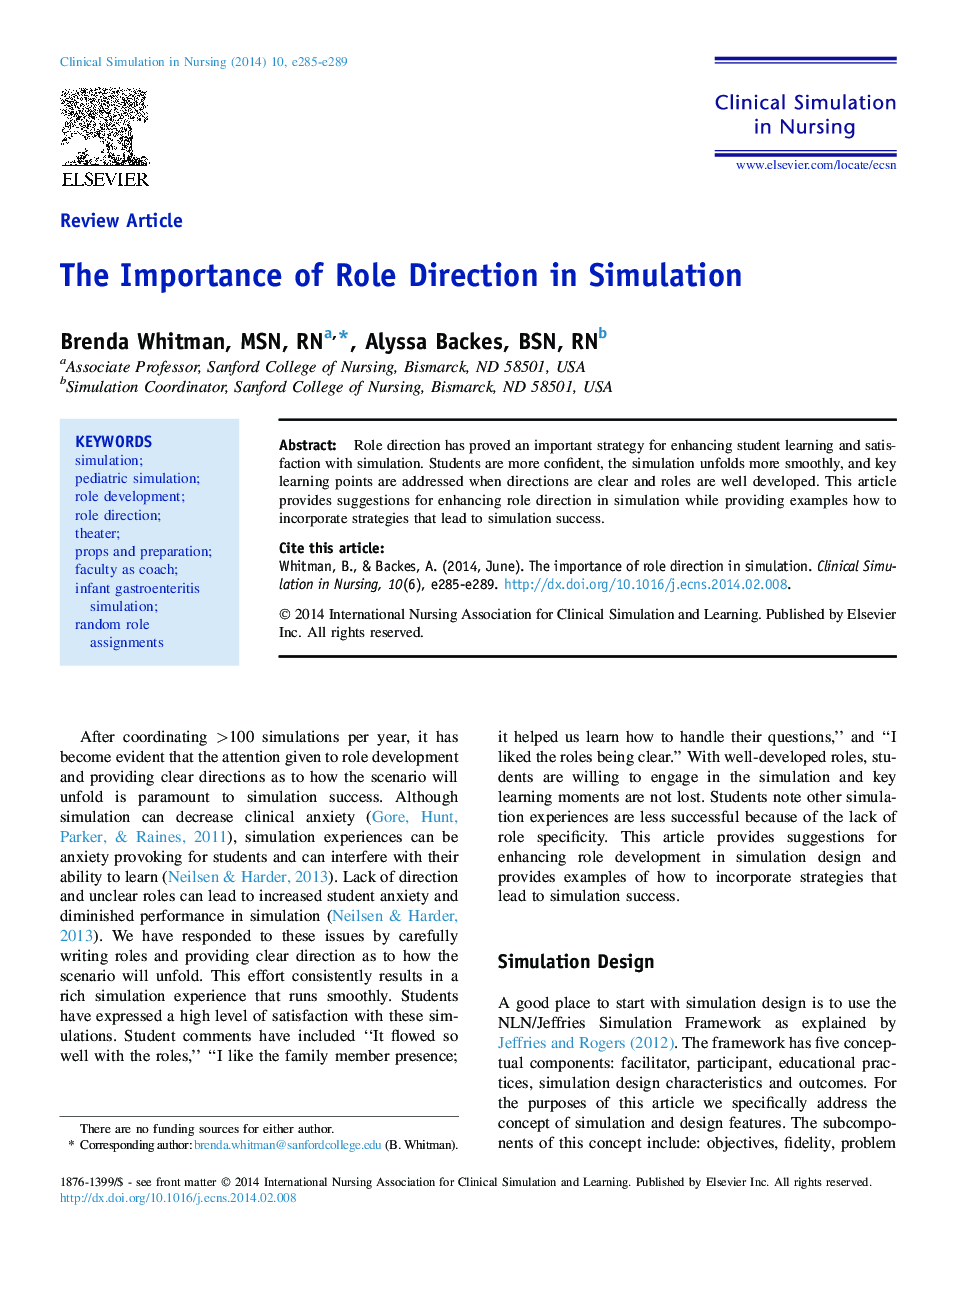 The Importance of Role Direction in Simulation 